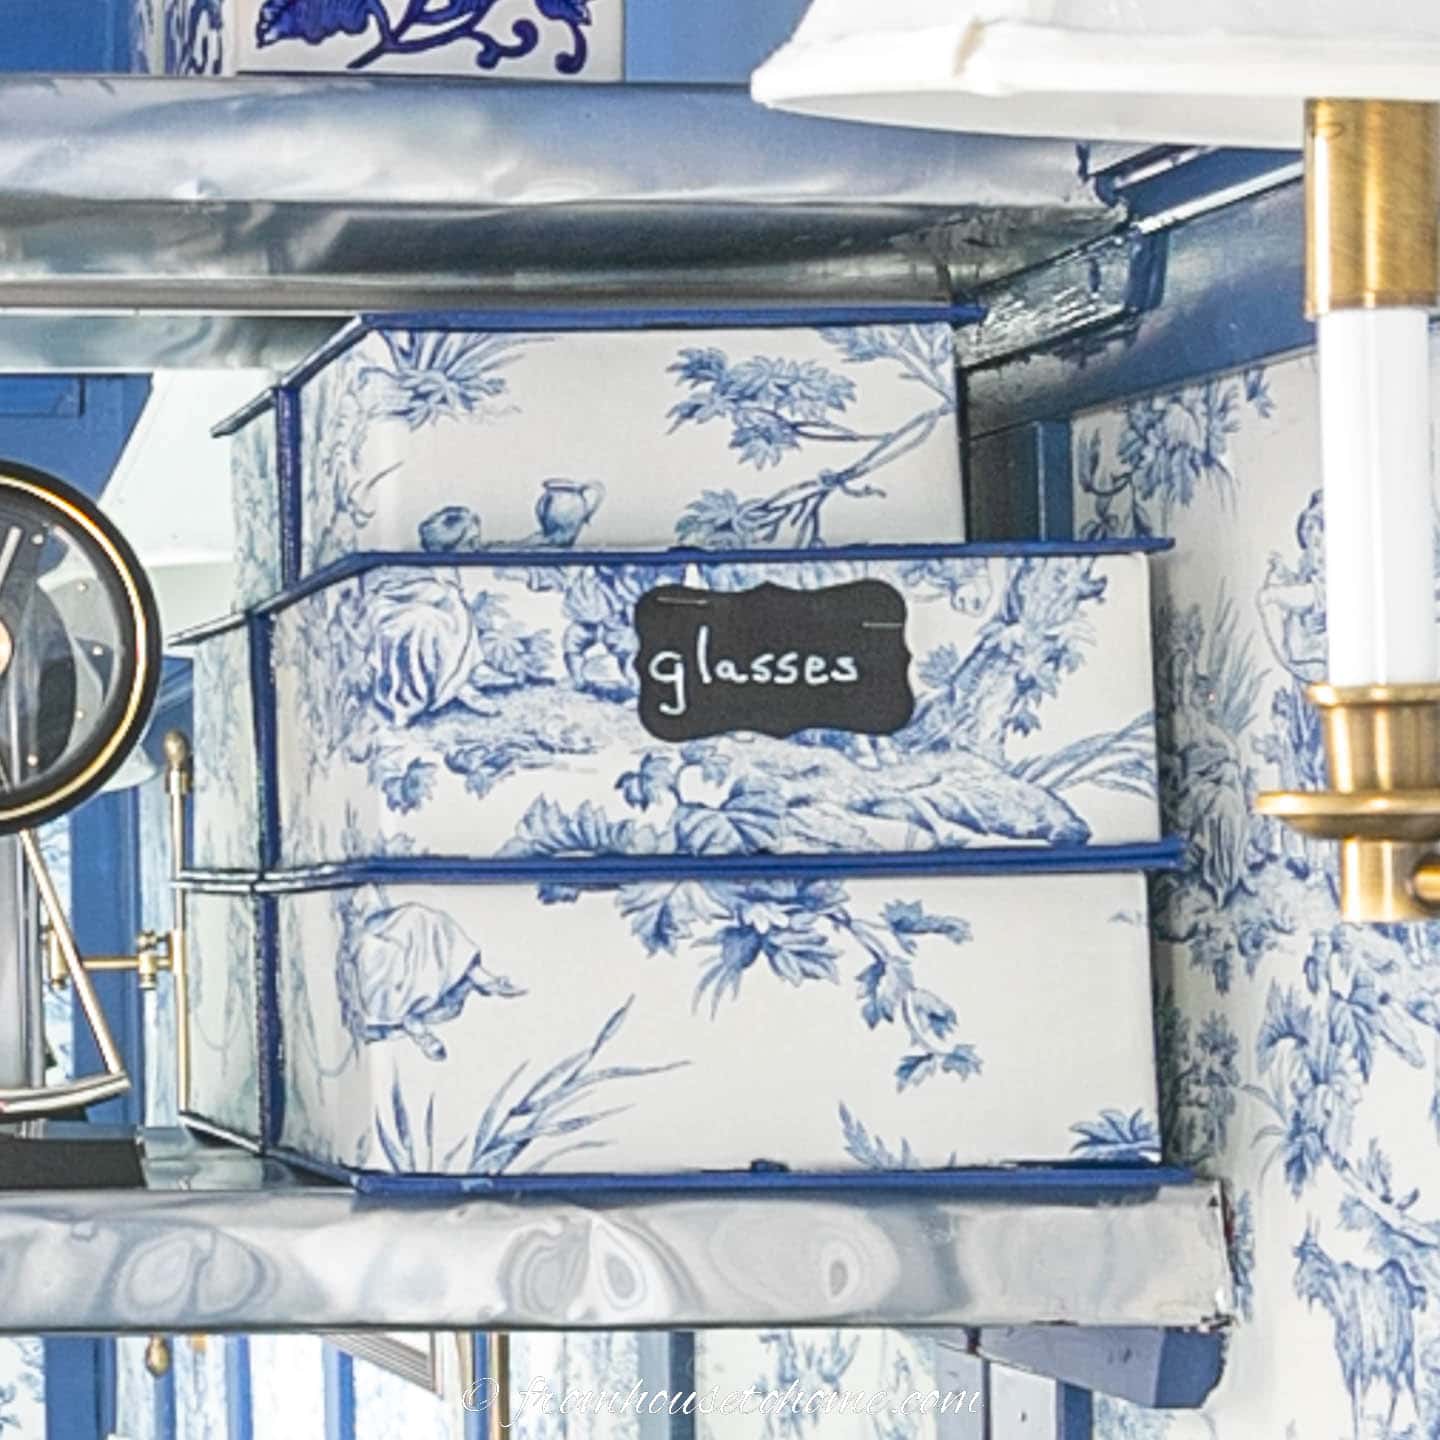 Small storage boxes covered with blue and white toile fabric